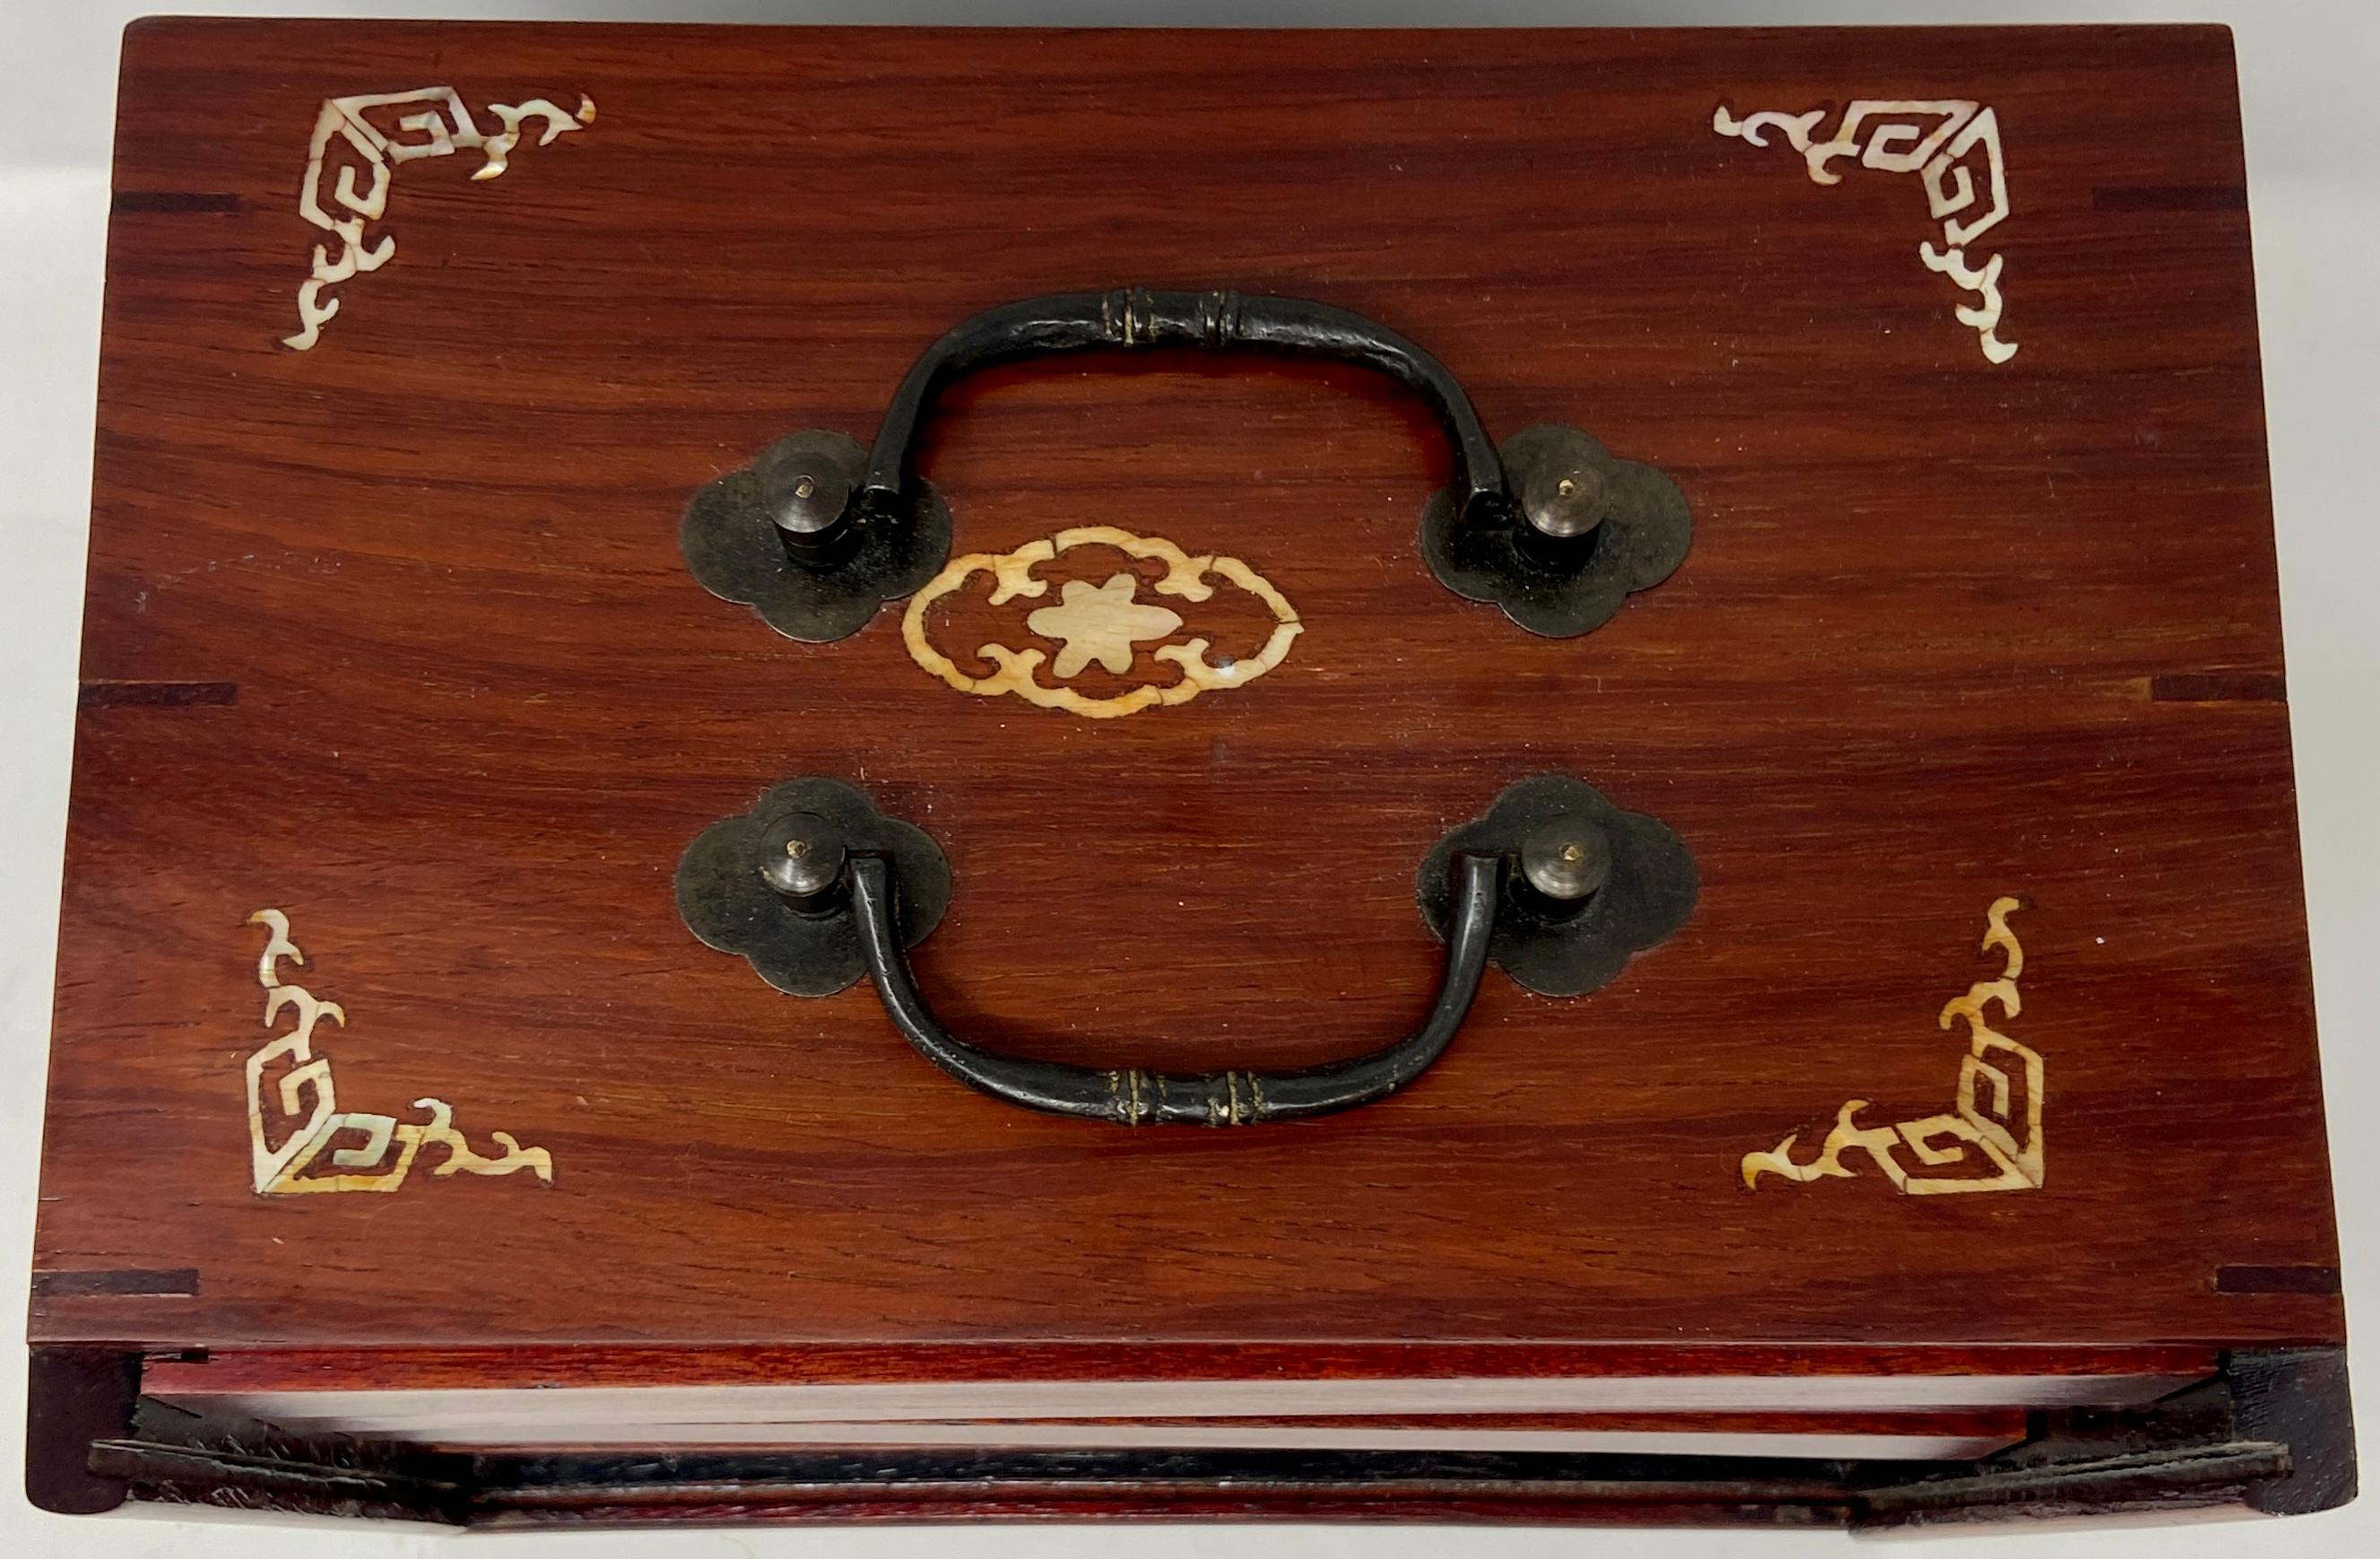 Bone Antique Chinese Mahjong Games Fitted Box Set, circa 1920s